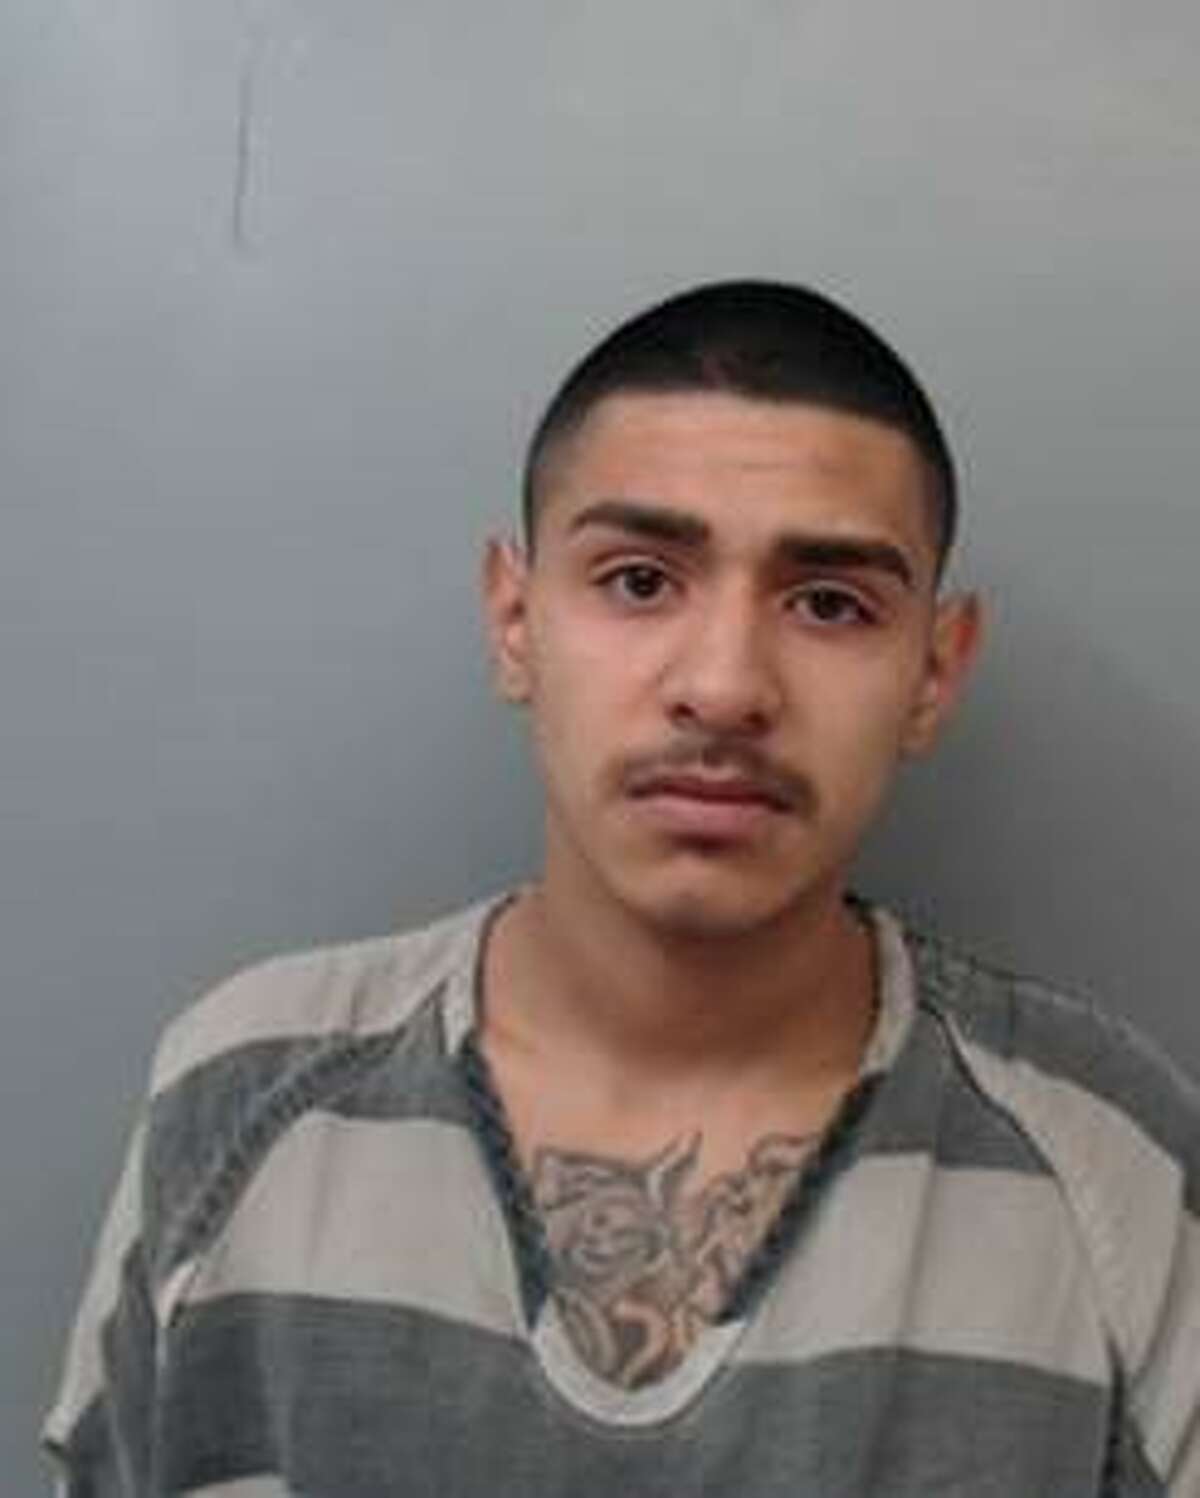 Jose Rolando Ortiz, 19, charged with possession of a controlled substance.